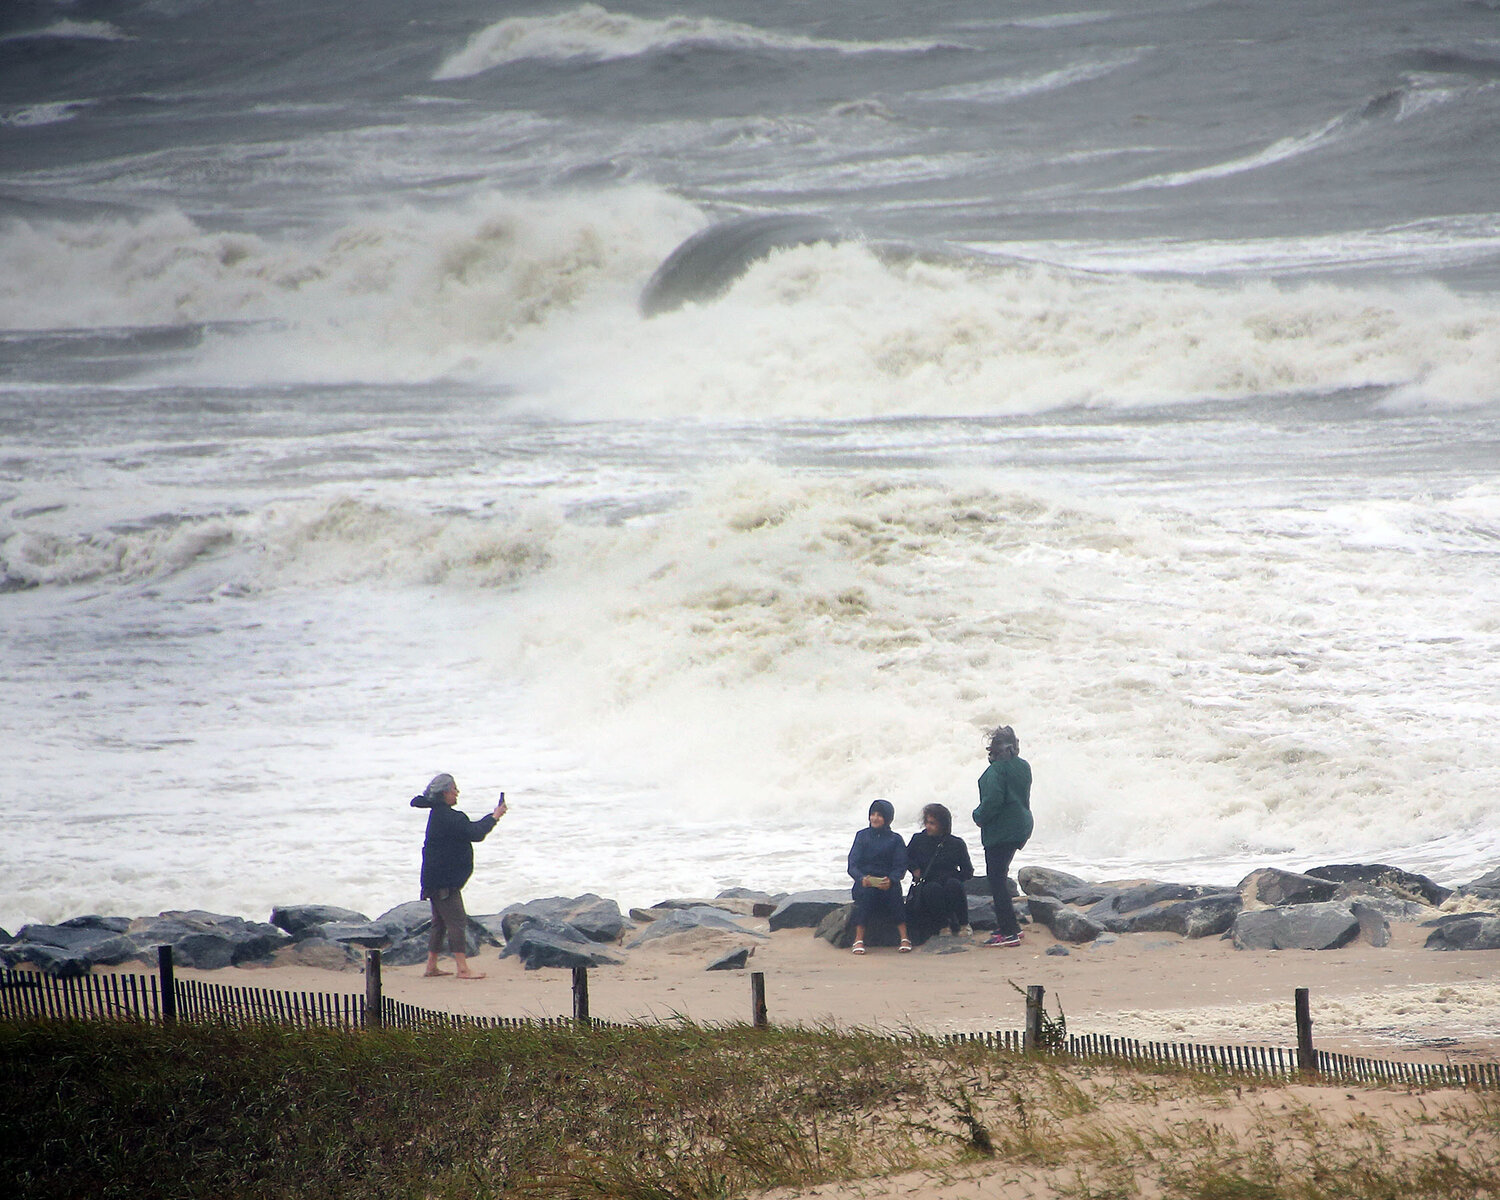 The raging sea at Herring Point in Cape Henlopen State Park provided a great backdrop for photos Saturday. Ophelia brought high winds and high seas at high tide.